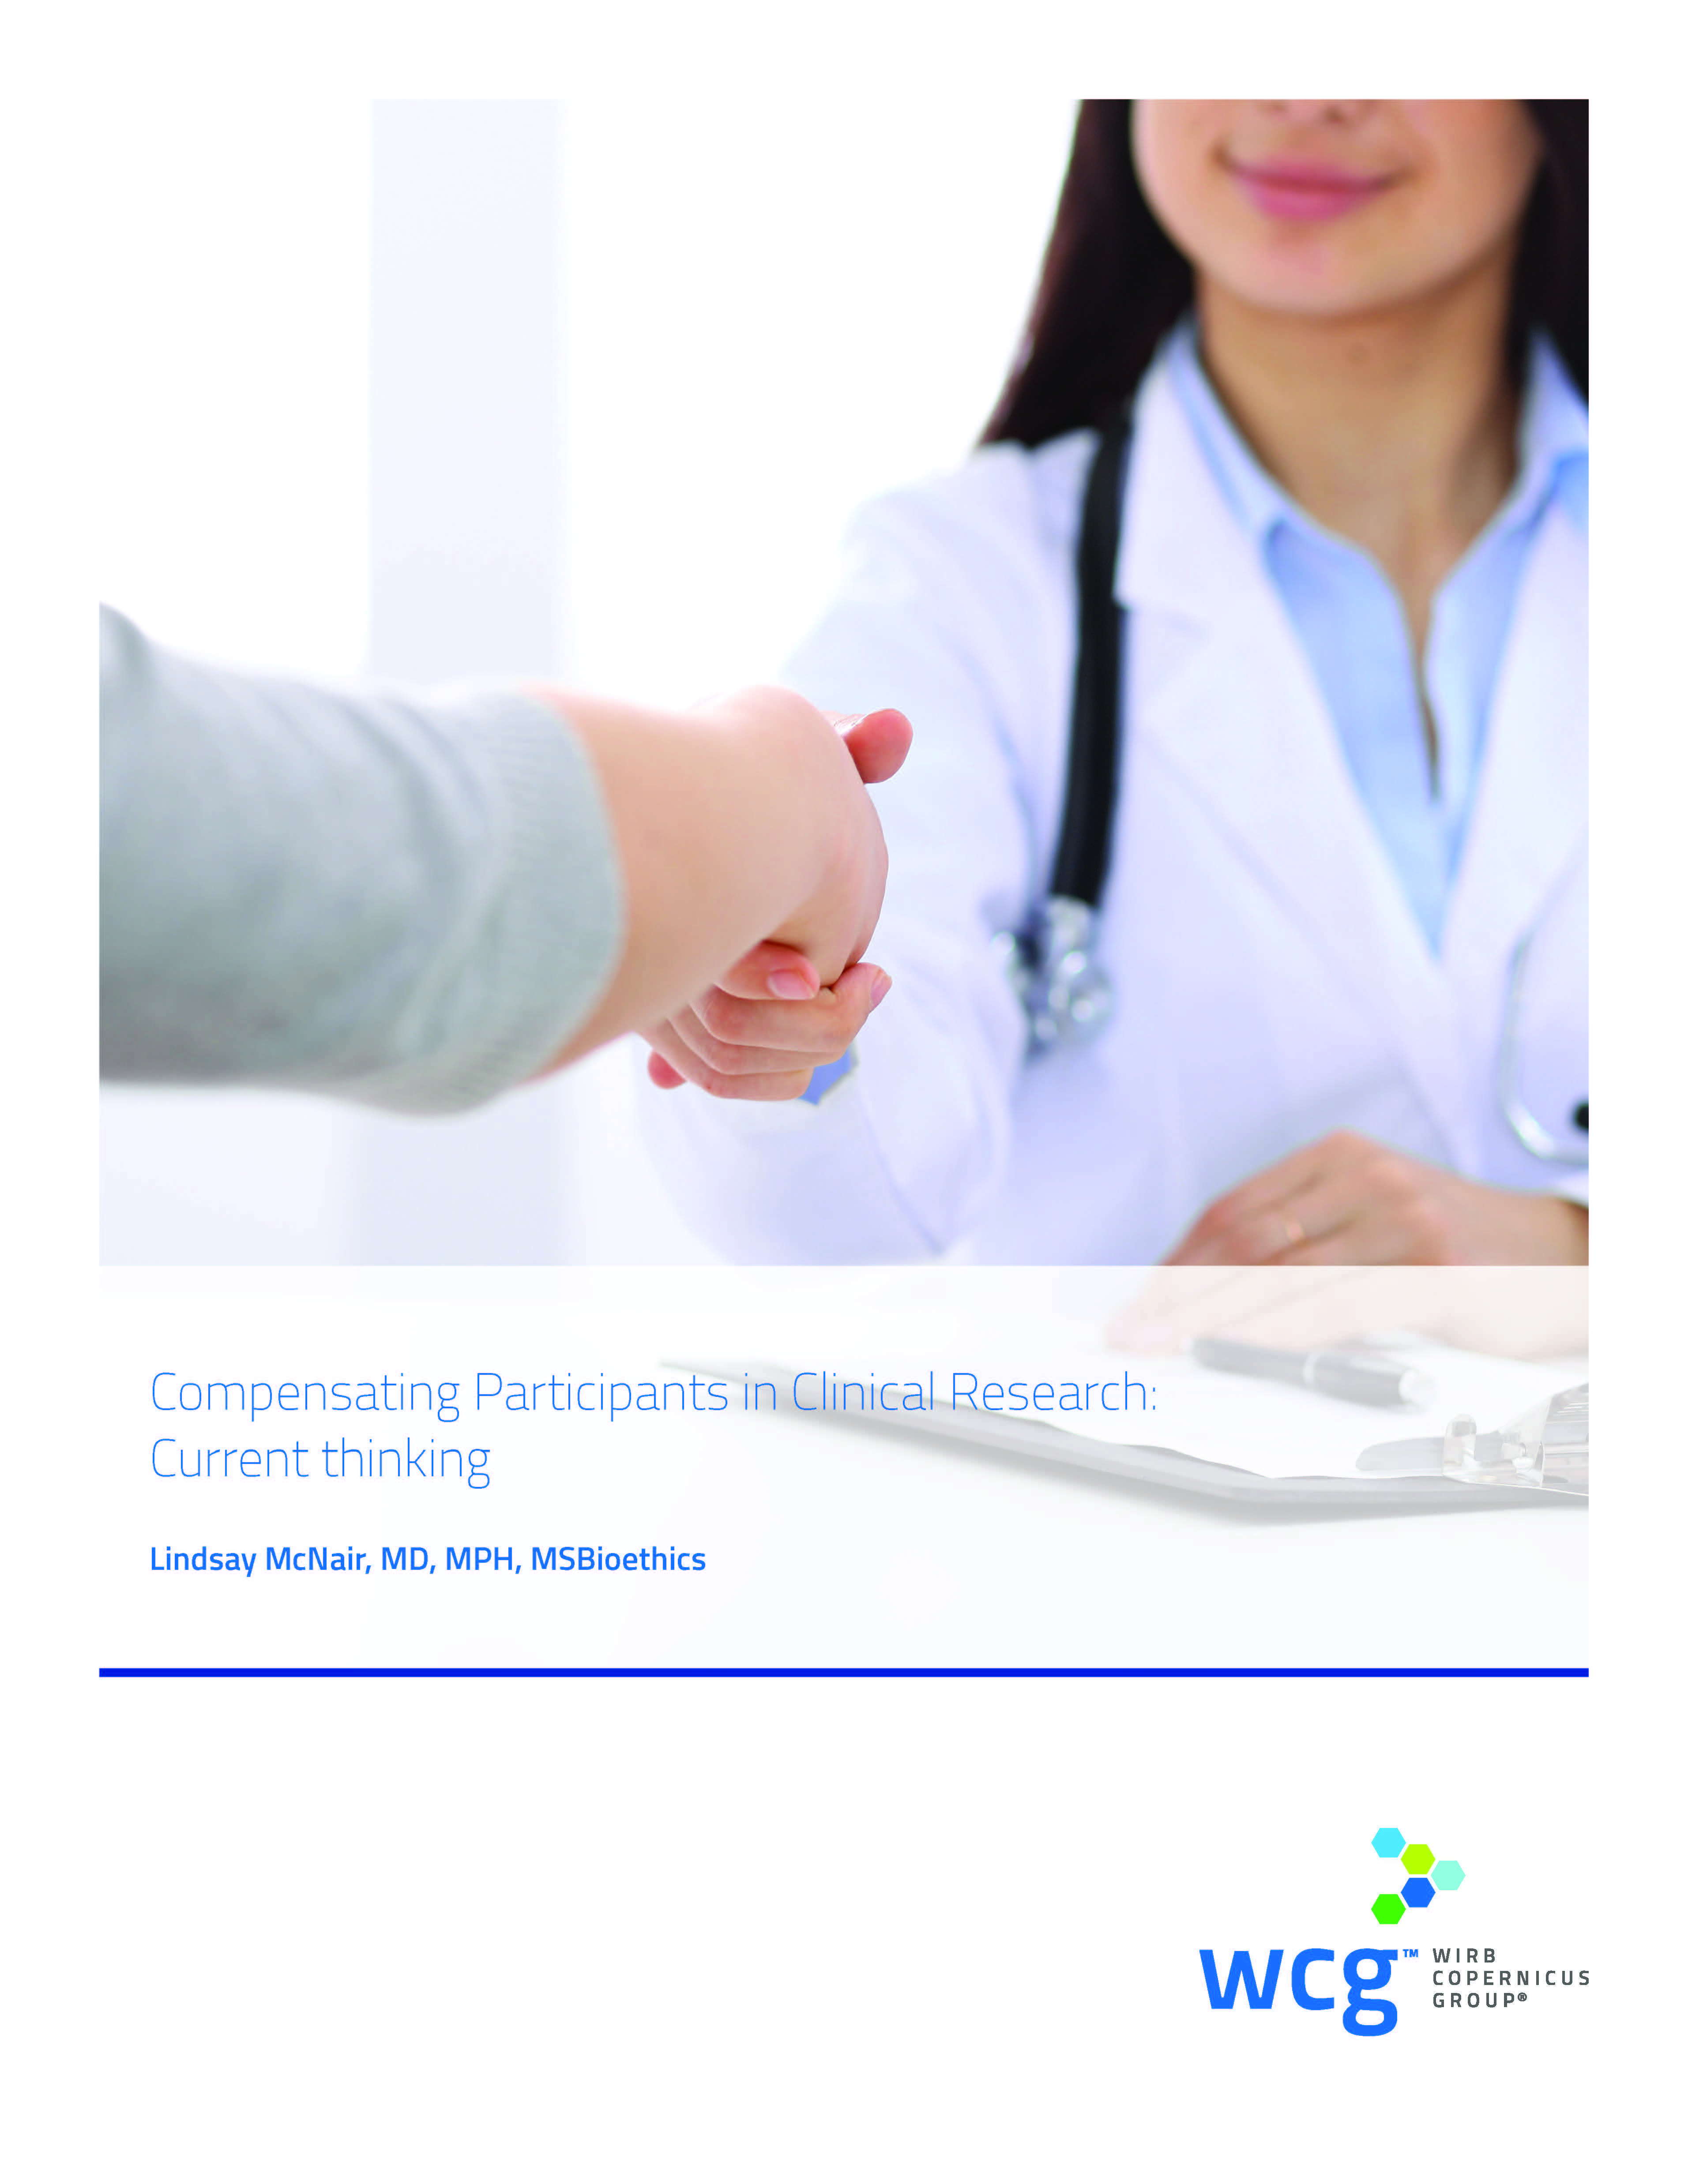 Compensating Participants in Clinical Research: Current Thinking